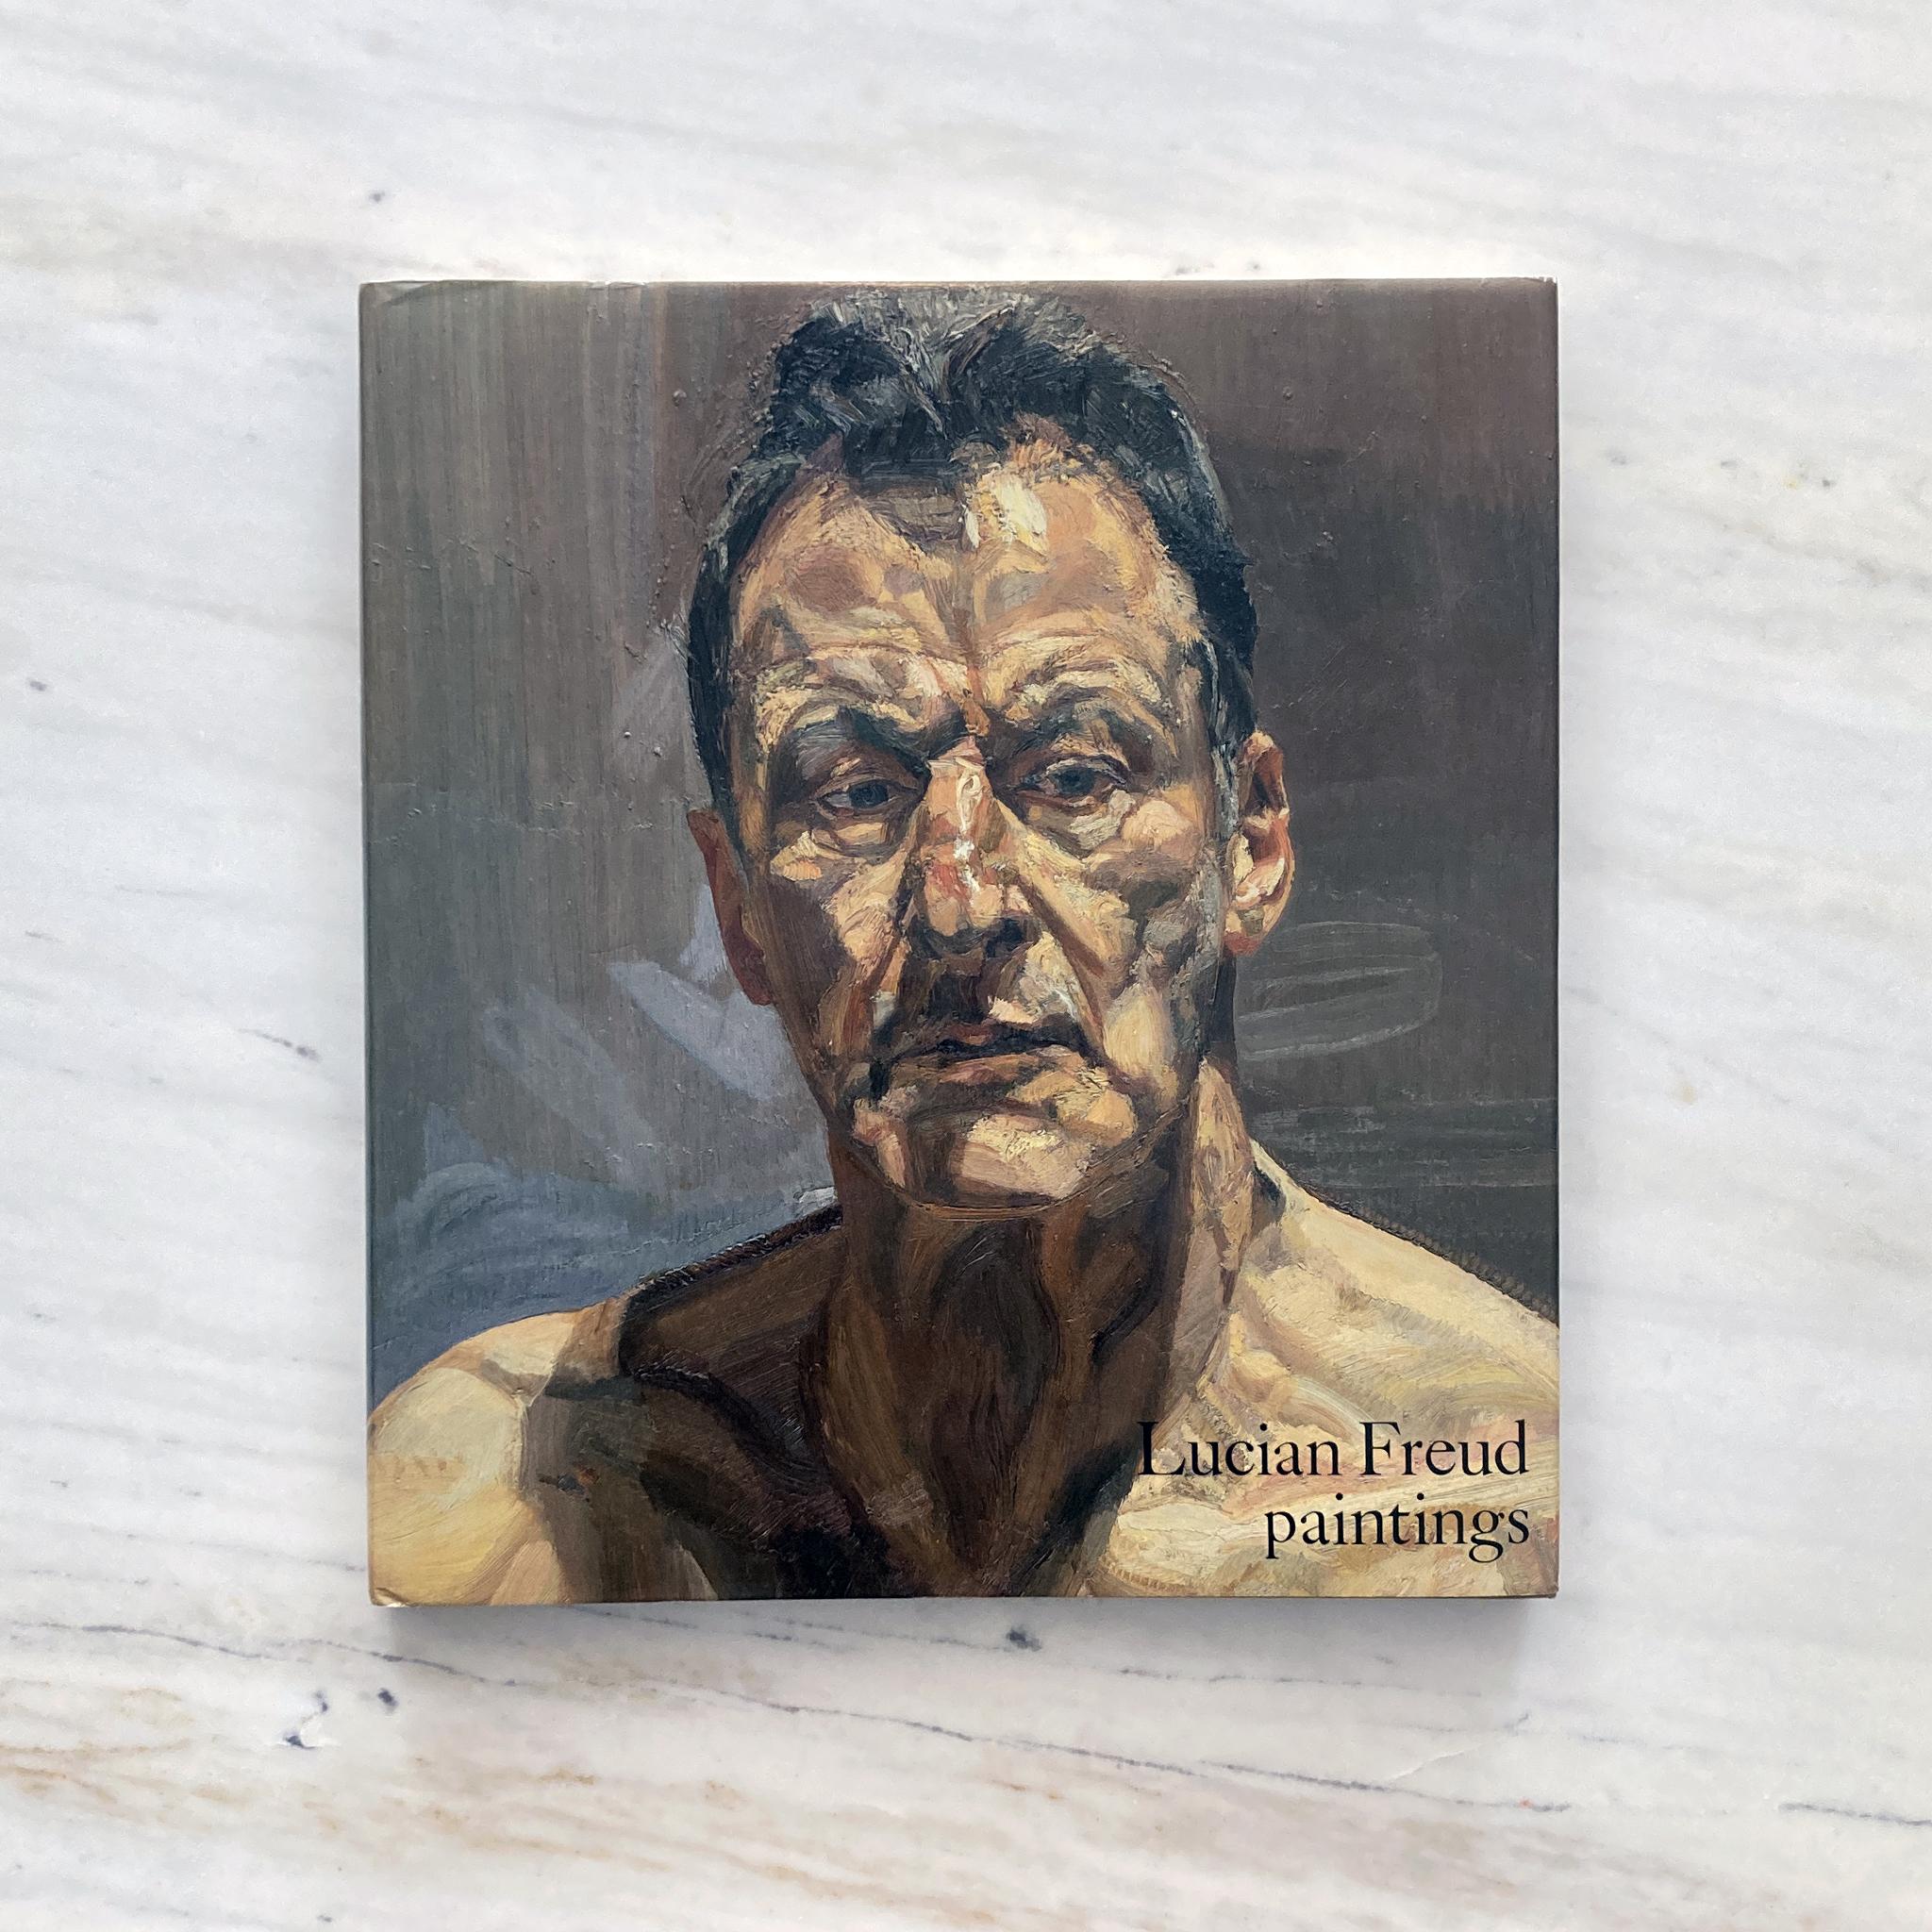 British Lucian Freud Paintings, by Robert Hughes, Thames and Hudson 1987, First Edition